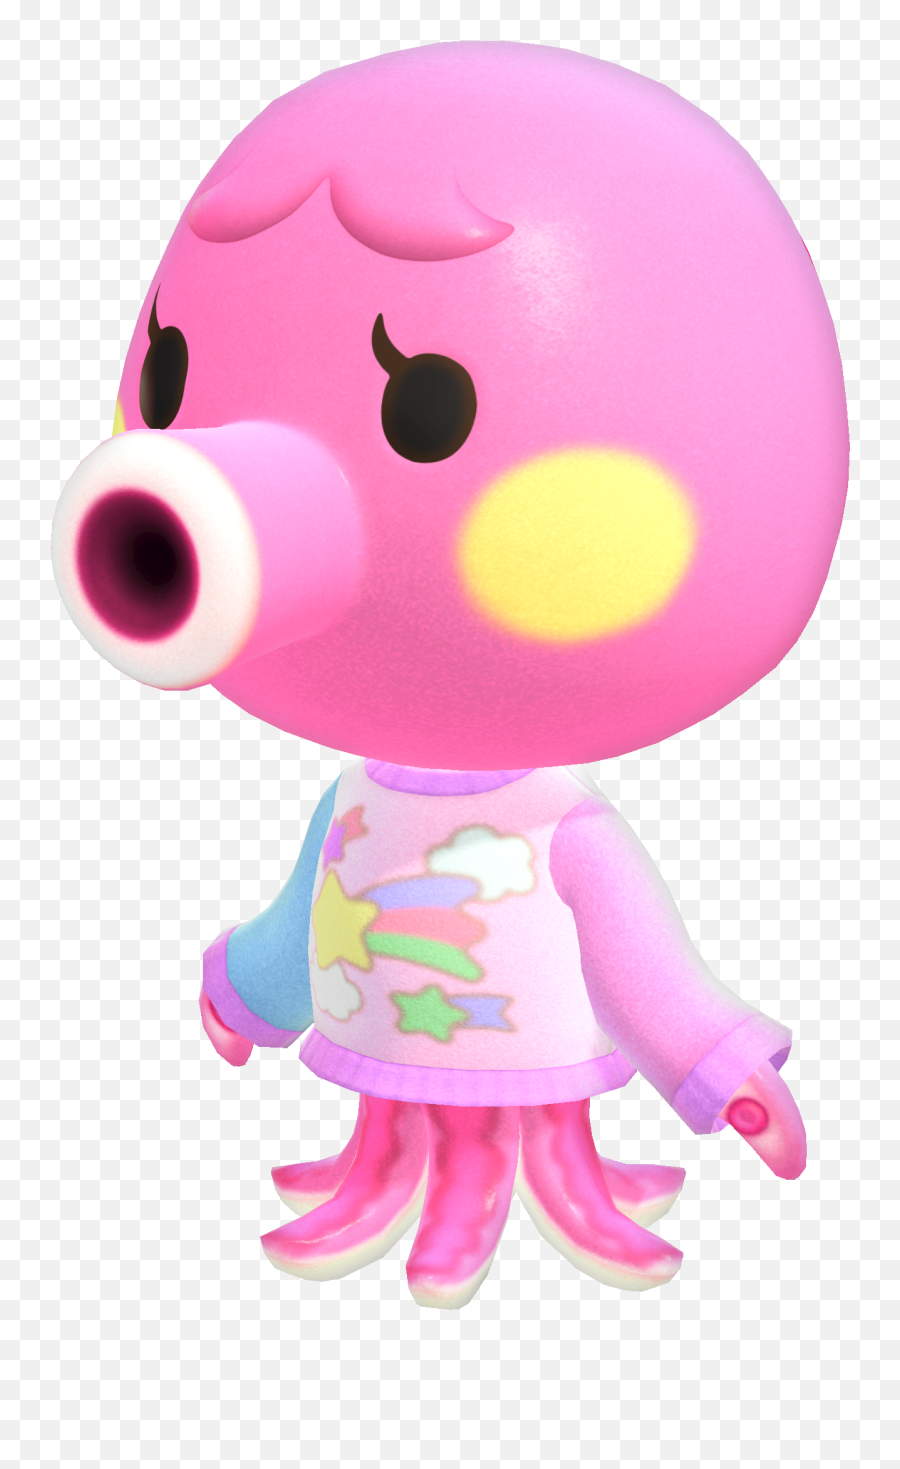 The Best Animal Crossing - Villagers Animal Crossing New Horizons Png Emoji,Animal Crossing New Leaf Shocked Emoticon